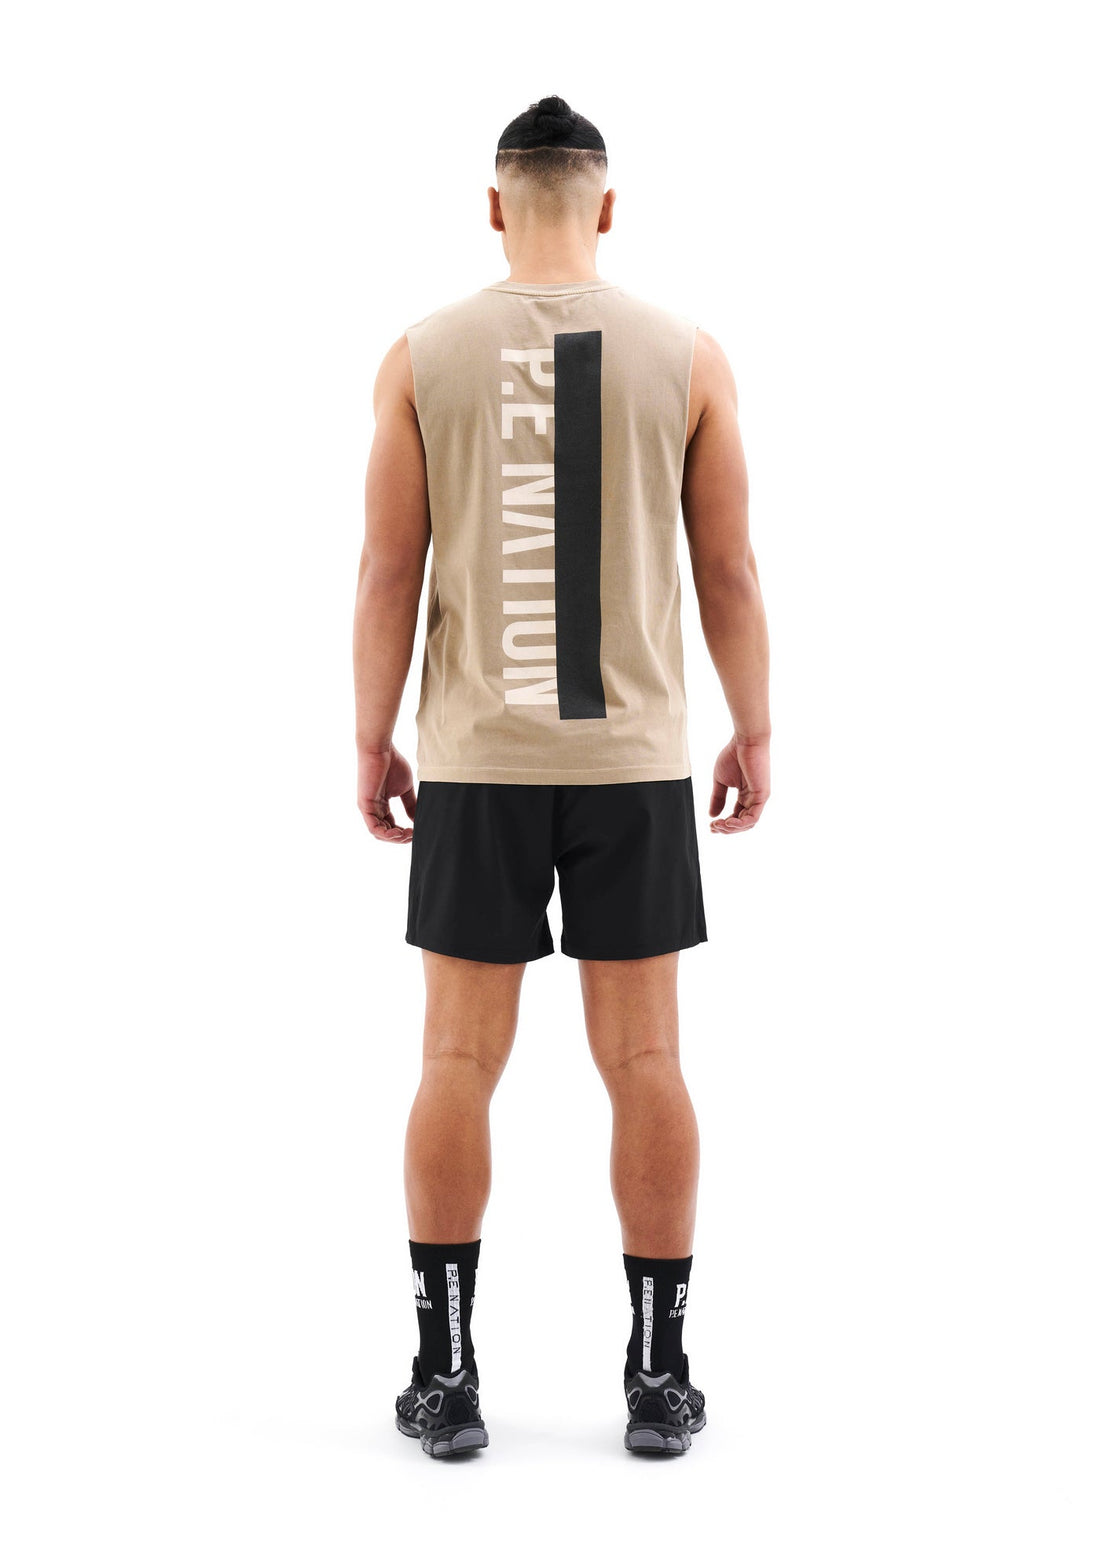 P.E NATION - Nevada Muscle Tank in Silver Mink